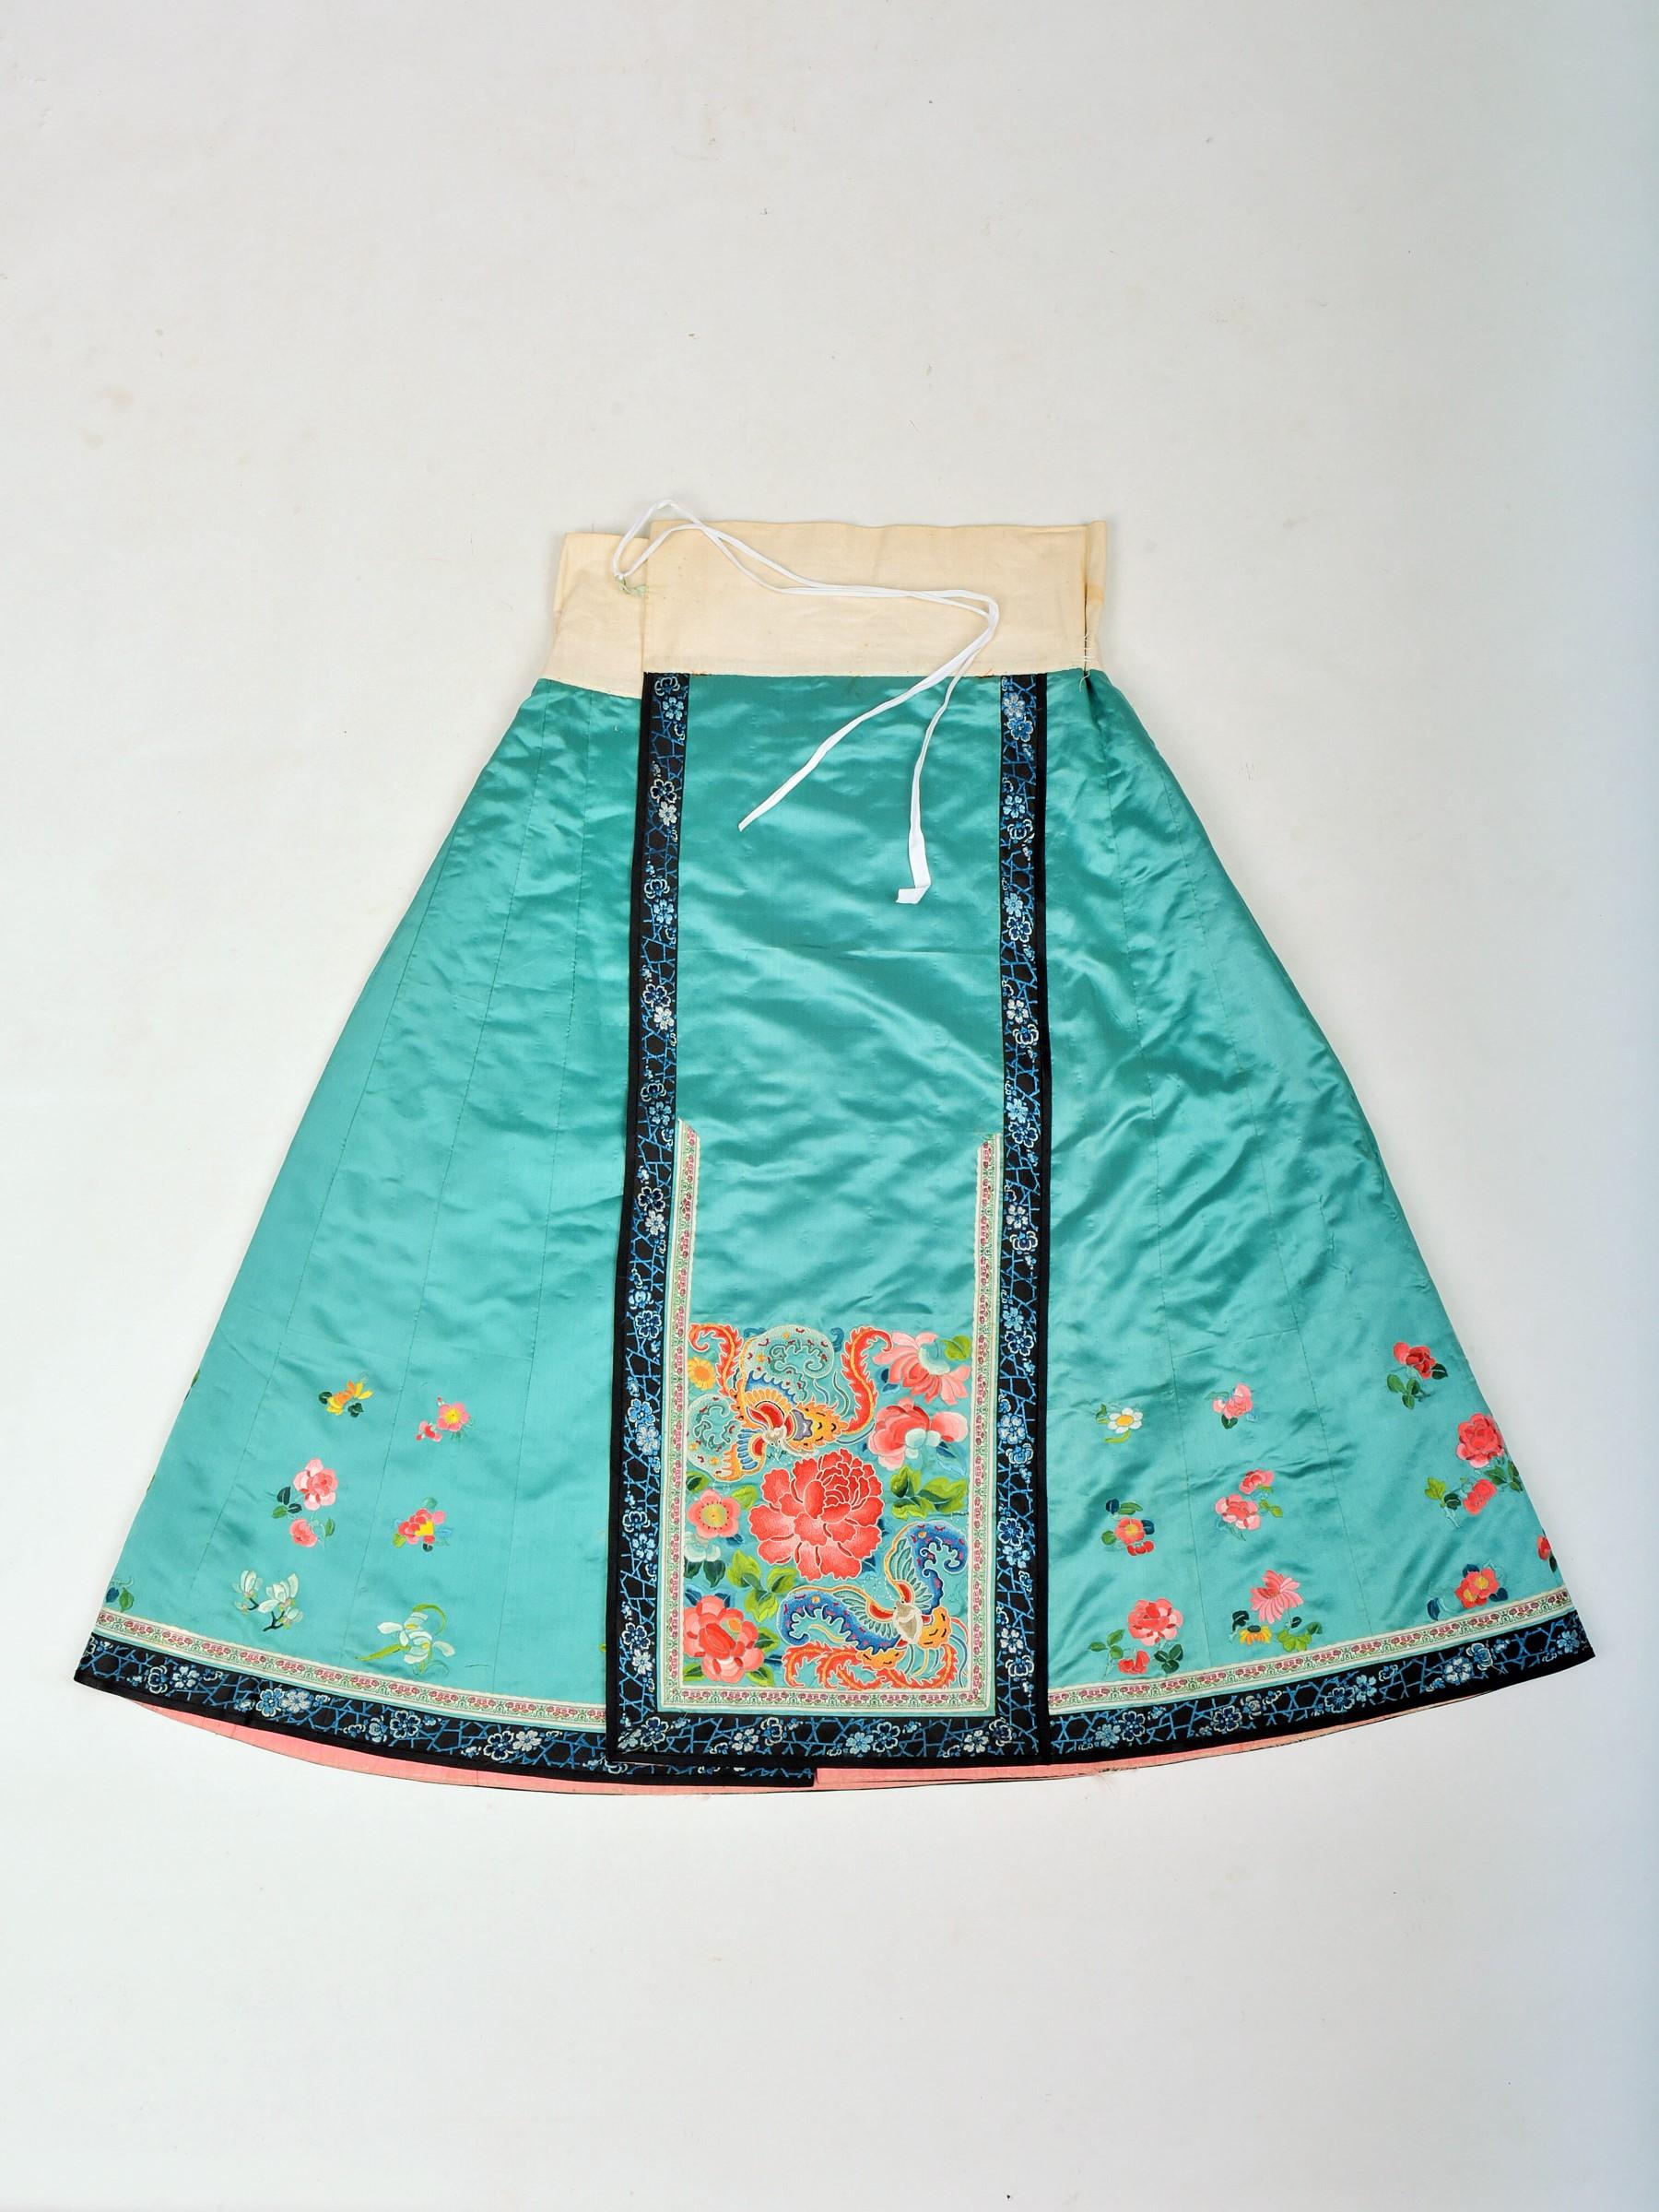 Semi Formal Silk Embroidered Manchu Woman's Skirt and Dress Qing period C.1900 1